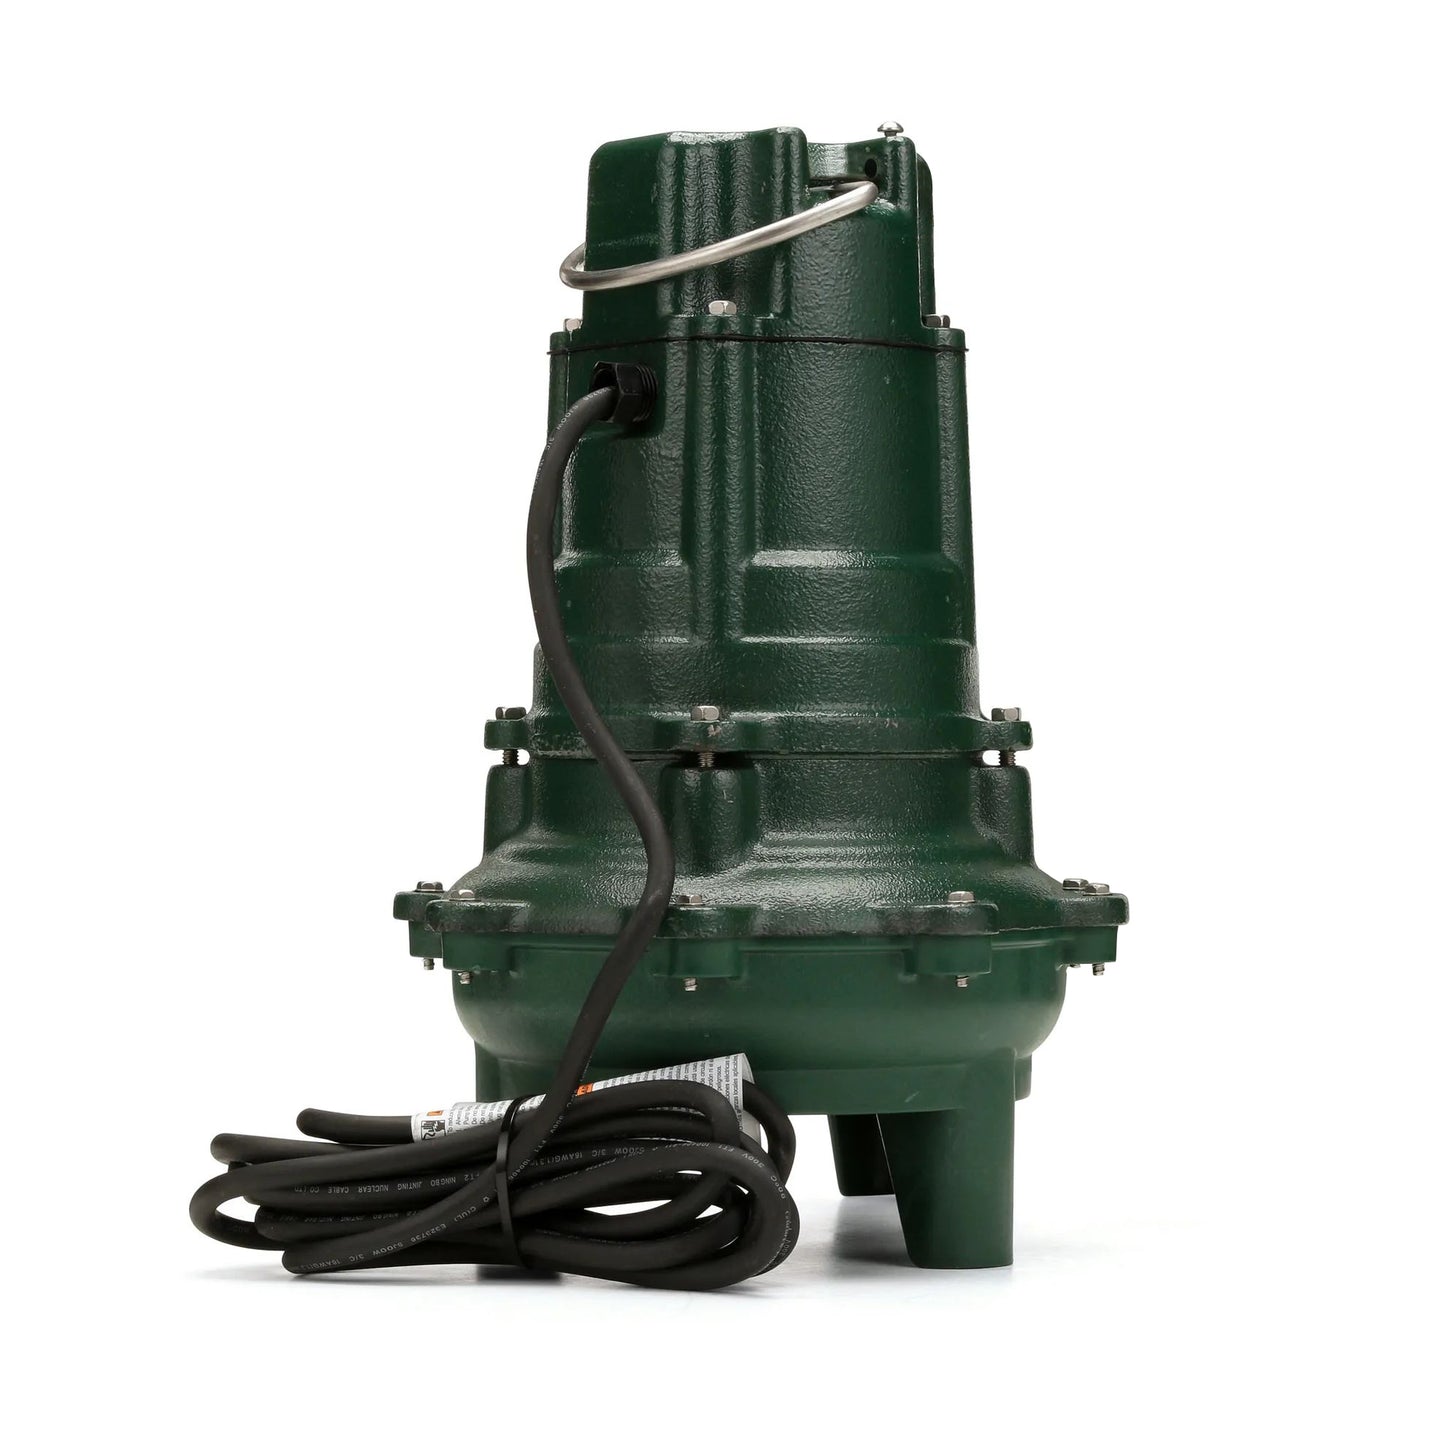 267-0002 - N267 Waste-Mate Non-Automatic Cast Iron Sewage Pump, 115V, 1/2 HP